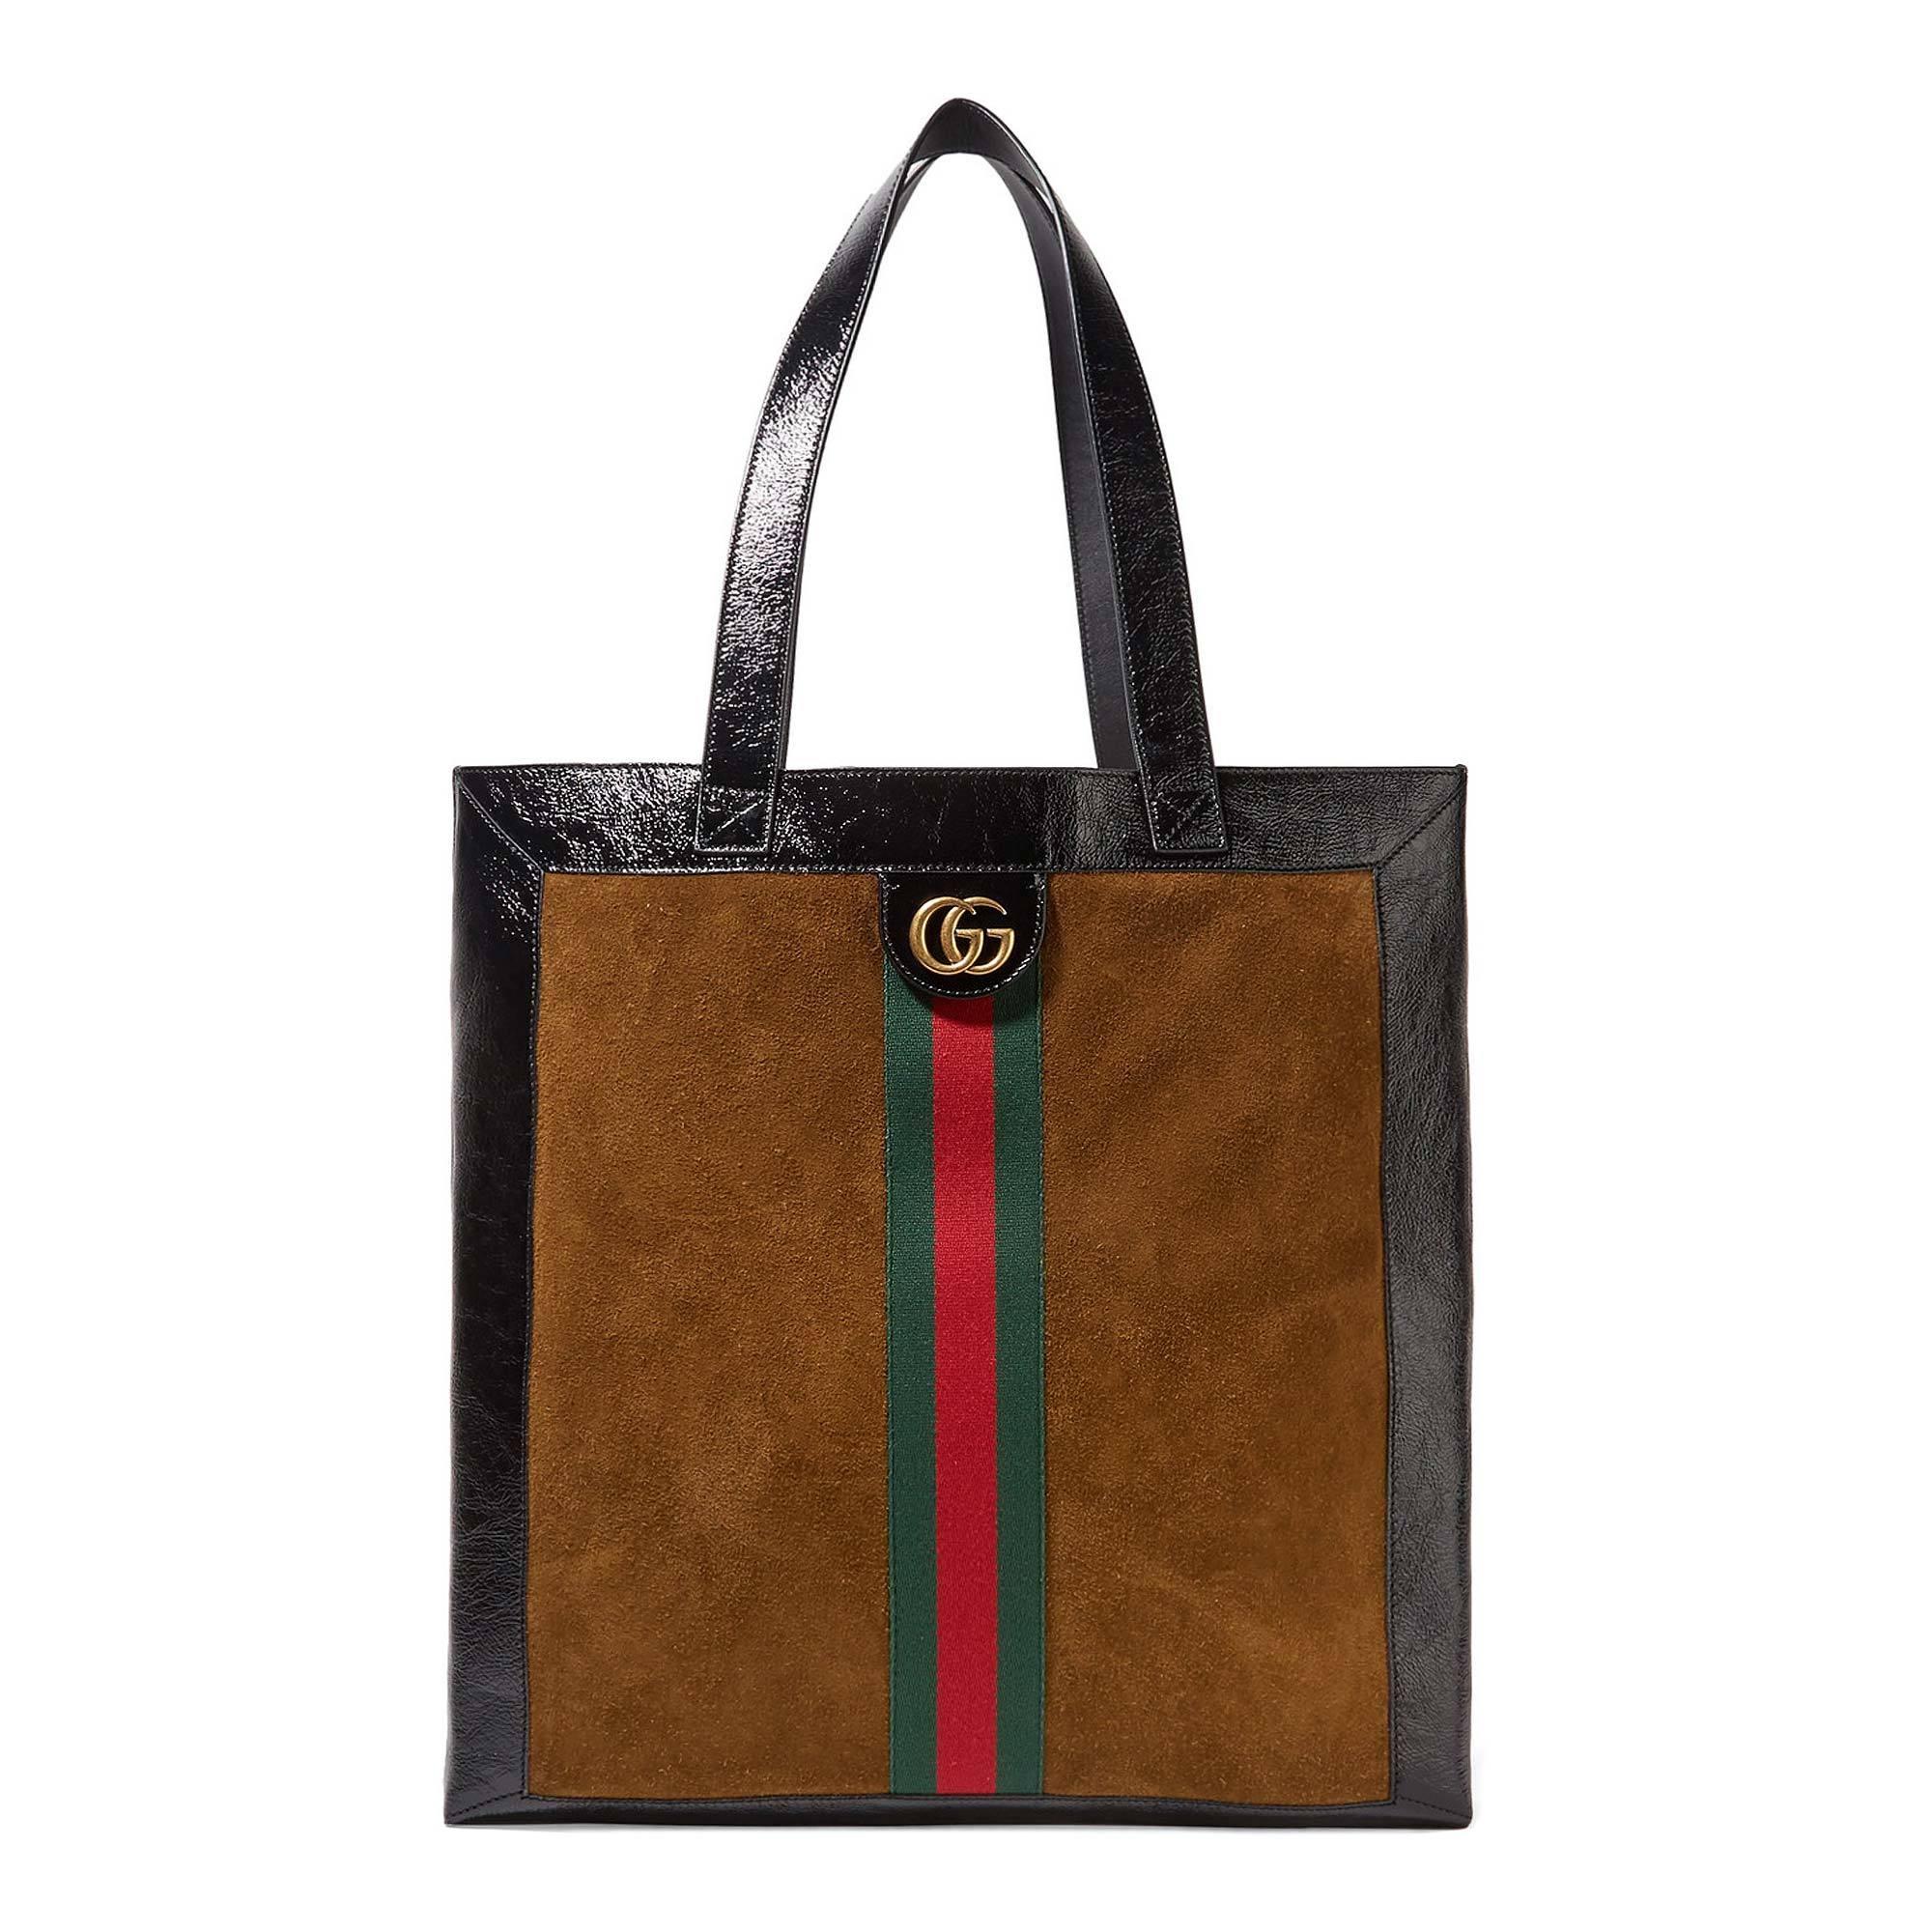 Gucci Ophidia Tote Bag in Brown - Lyst